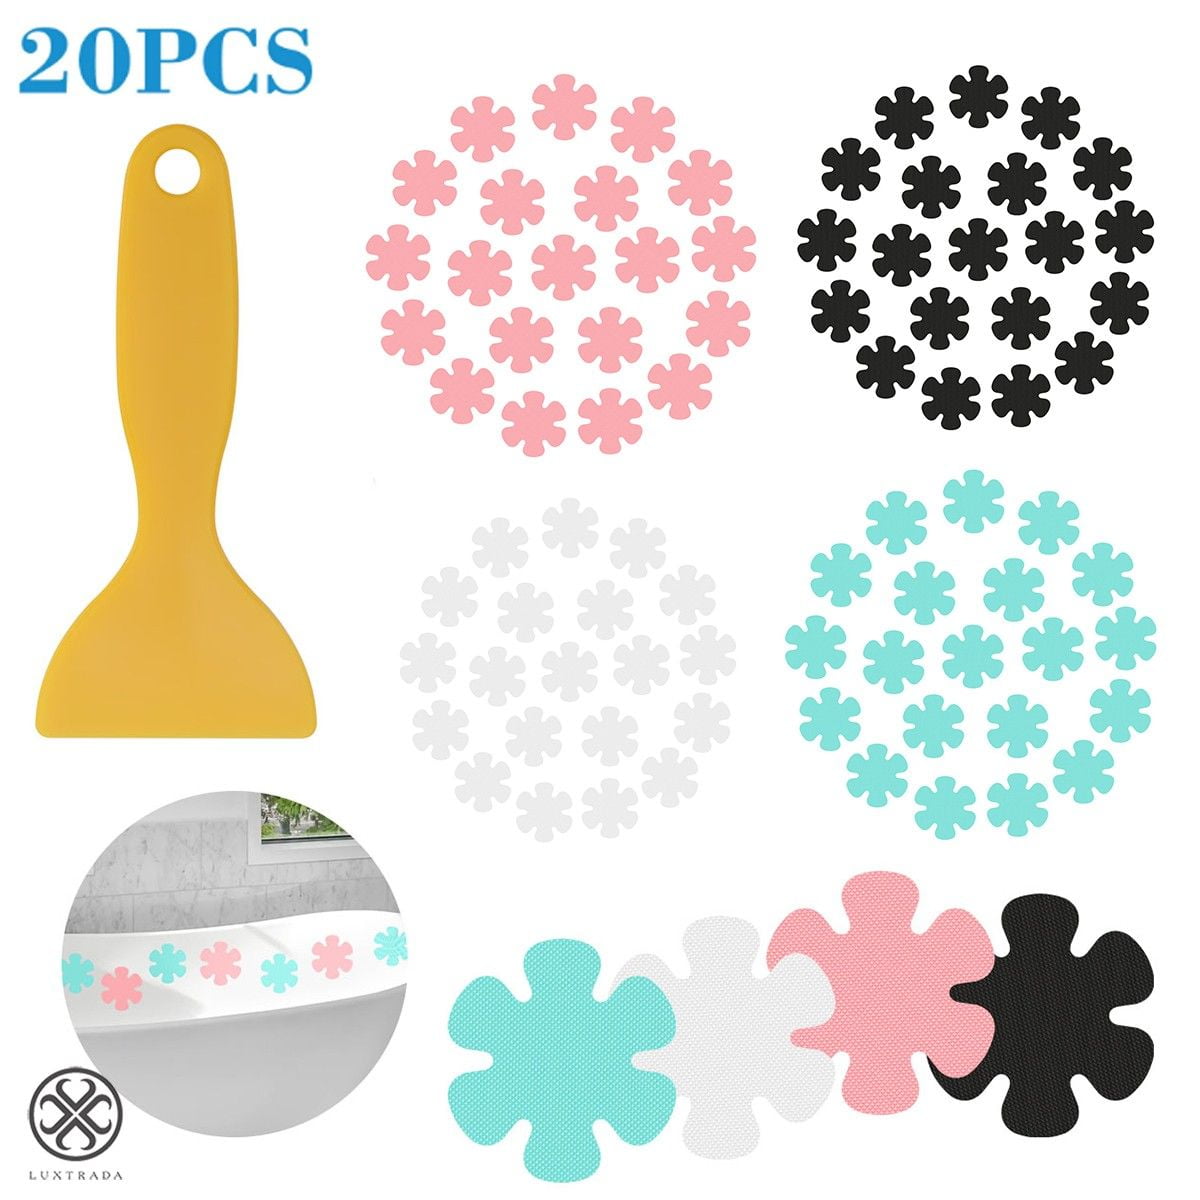 20Pcs Anti-slip Flower Decals Stickers Pads Shower Treads Applique For Tub Safe 